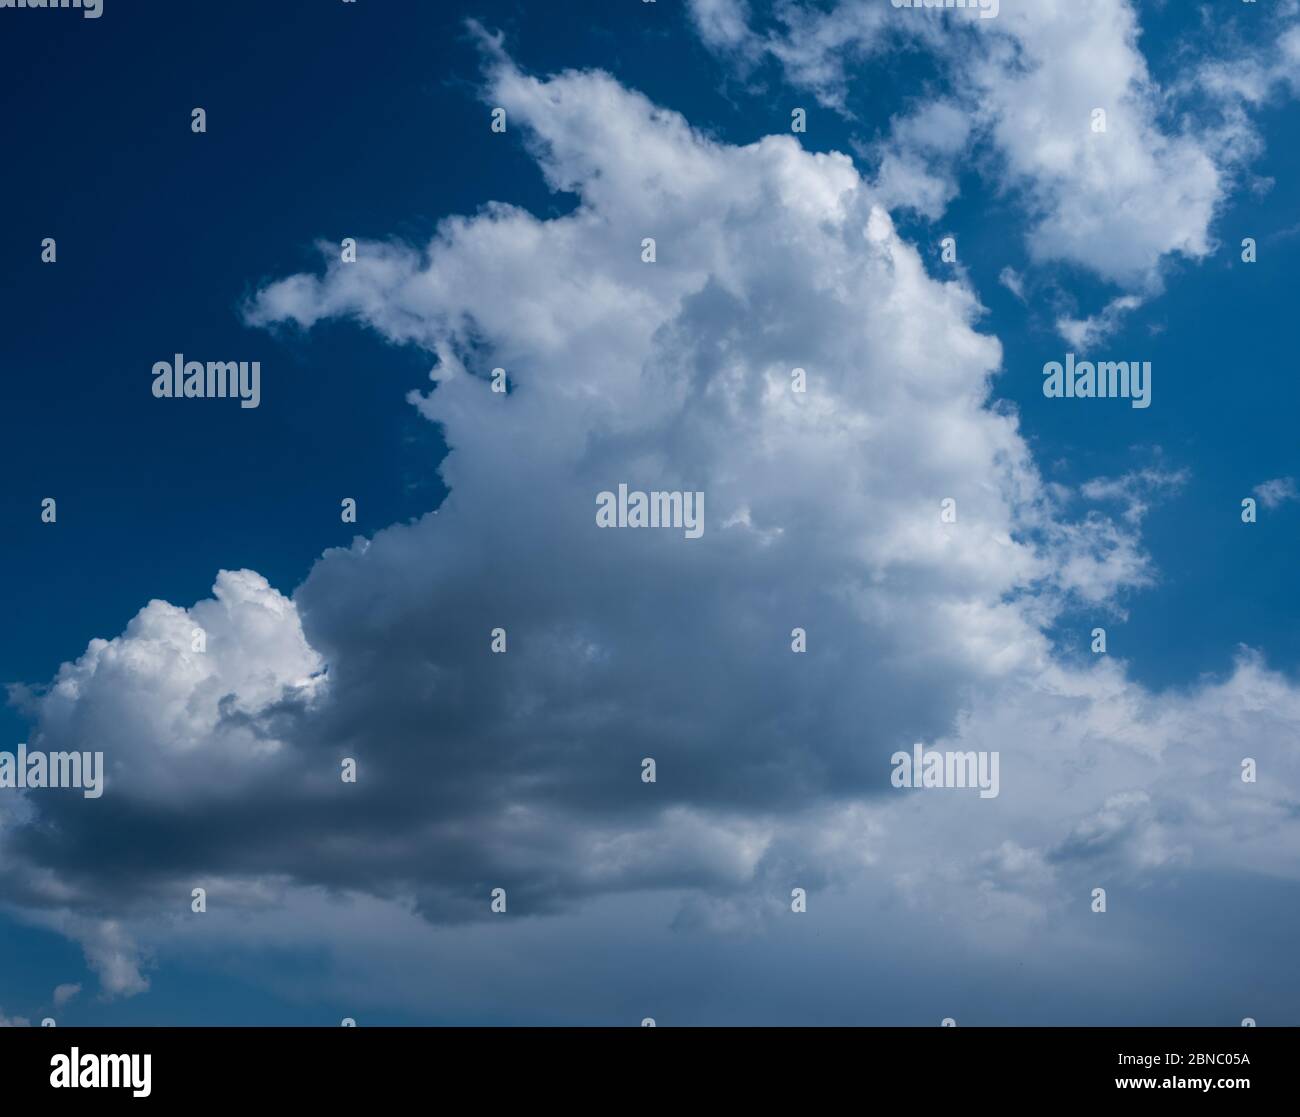 Clouds in the sky. Square image size. design background Stock Photo